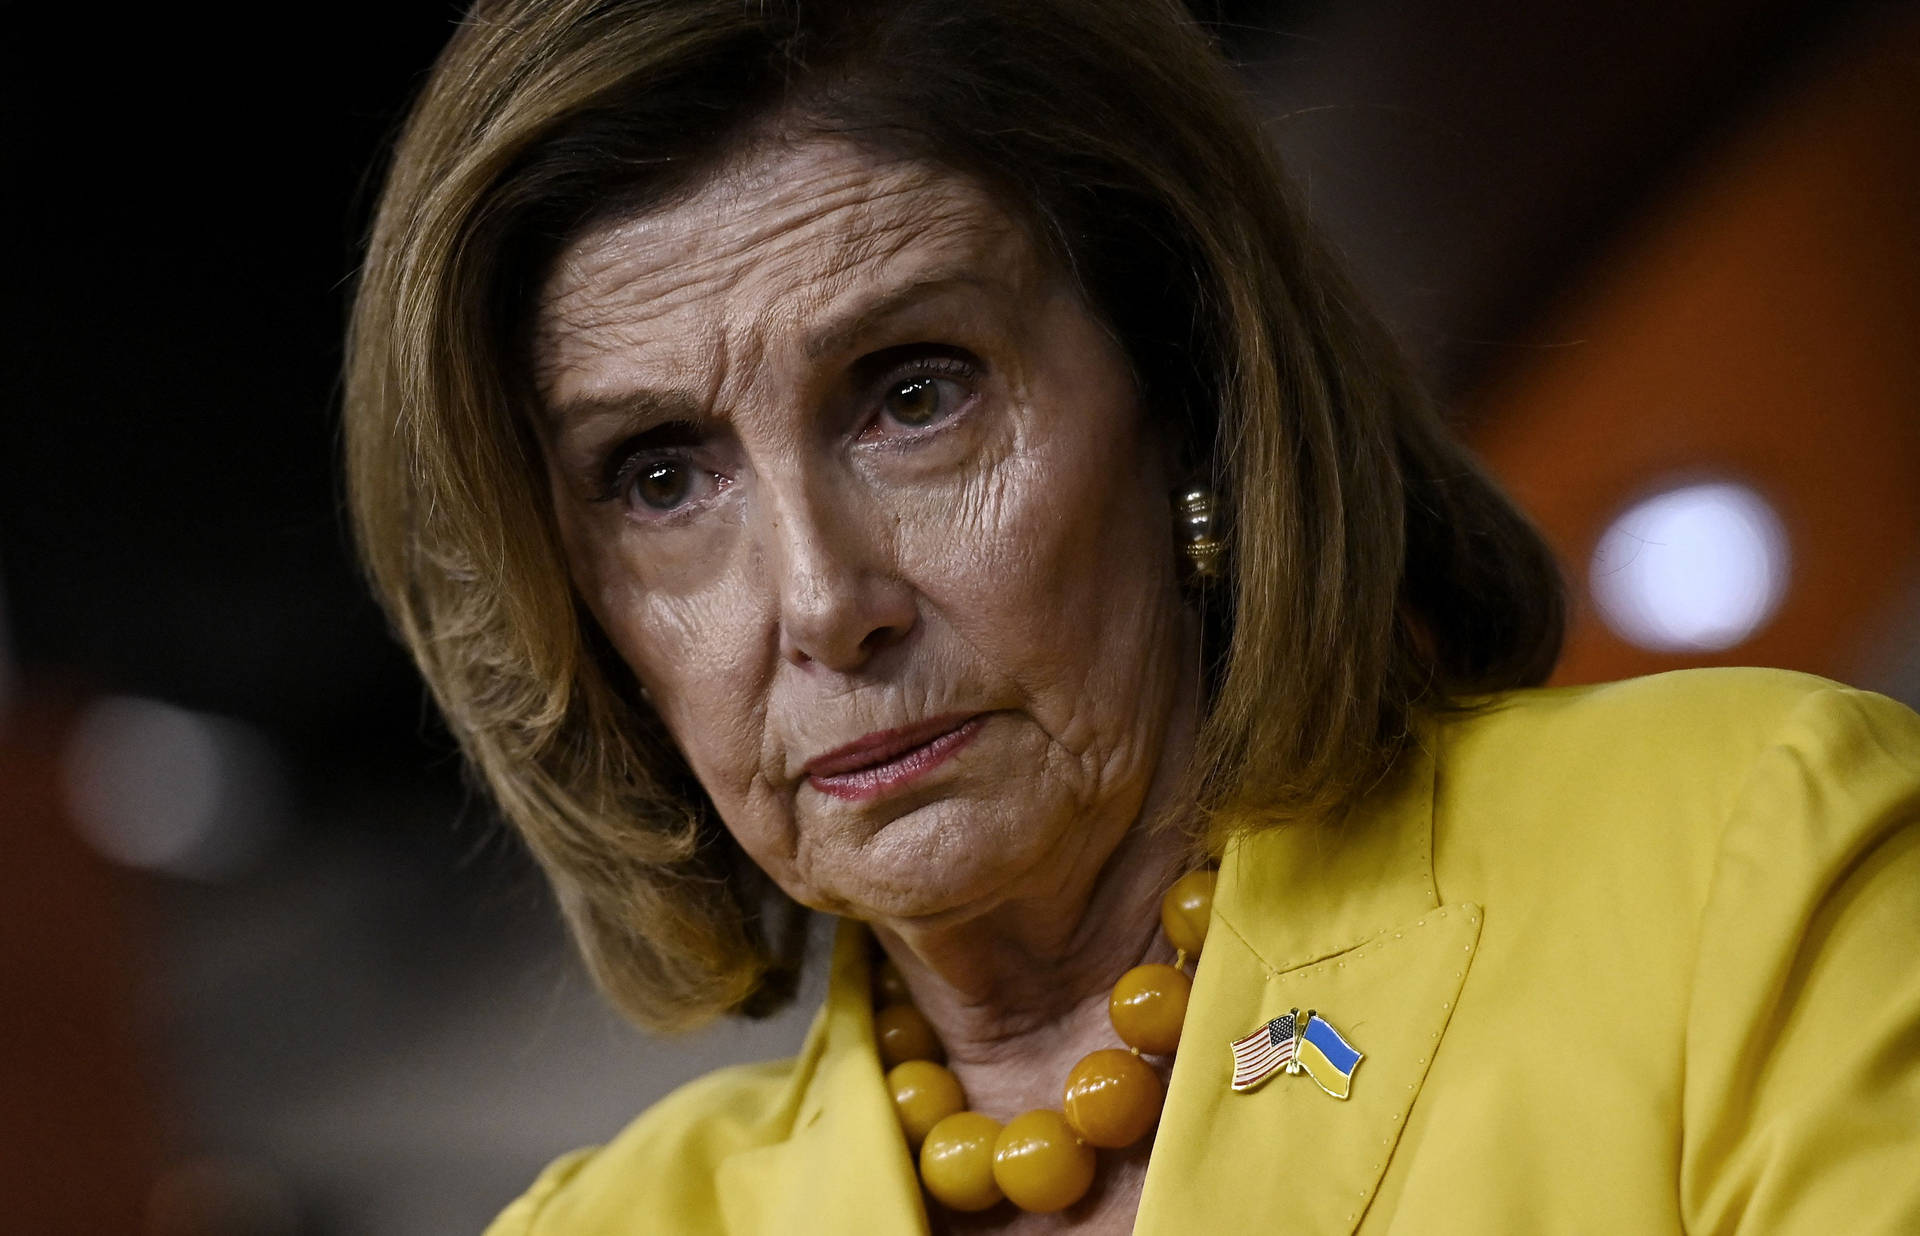 Nancypelosi Gelbes Outfit Wallpaper